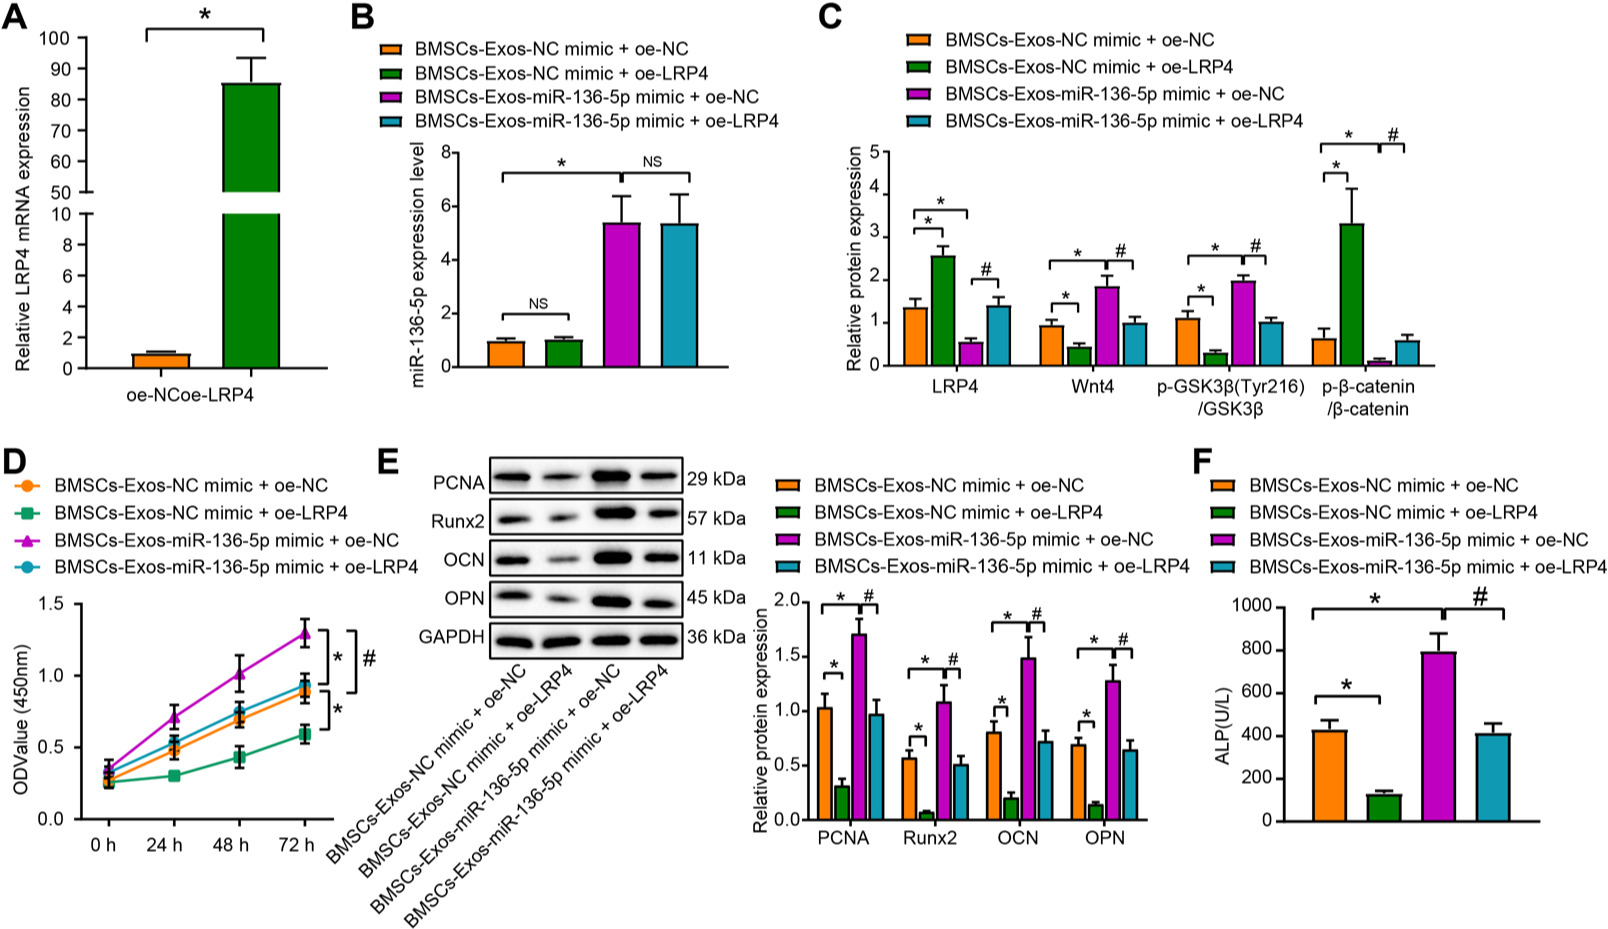 Fig. 5 
            miR-136-5p-containing bone marrow mesenchymal stem cell (BMSC)-Exos regulate low-density lipoprotein receptor related protein 4 (LRP4)/Wnt/β-catenin axis to promote MC3T3-E1 proliferation and osteogenic differentiation. a) Reverse transcription quantitative polymerase chain reaction (RT-qPCR) detection of the transfection efficiency of LRP4 overexpression in MC3T3-E1 cells; MC3T3-E1 cells were treated with exosomes from miR-136-5p mimic-transfected BMSCs, or in combination with oe-LRP4. b) RT-qPCR detection of the expression of miR-136-5p in MC3T3-E1 cells; c) Western blot detection of the expression of LRP4 and Wnt/β-catenin pathway related proteins in MC3T3-E1 cells; d) cell counting kit (CCK)-8 detection of the proliferation rate of MC3T3-E1 cells; e) Western blot detection of the protein expression of proliferating cell nuclear antigen (PCNA), Runt-related transcription factor 2 (Runx2), osteocalcin (OCN), and osteopontin (OPN) in MC3T3-E1 cells; f) alkaline phosphatase (ALP) activity of the supernatant of MC3T3-E1 cells detected by disodium phenyl phosphate microplate method. * and # indicate p < 0.05, and NS represents p > 0.05. Measurement data were presented as mean and standard deviation. Unpaired t-test was used for data comparison between two groups. Data comparisons among multiple groups were performed using one-way analysis of variance (ANOVA) with Tukey’s post hoc test. Data comparison among groups at different timepoints was performed by repeated measures ANOVA with Bonferroni’s post hoc test. The experiment was repeated three times. mRNA, messenger RNA; NS, non-significant.
          